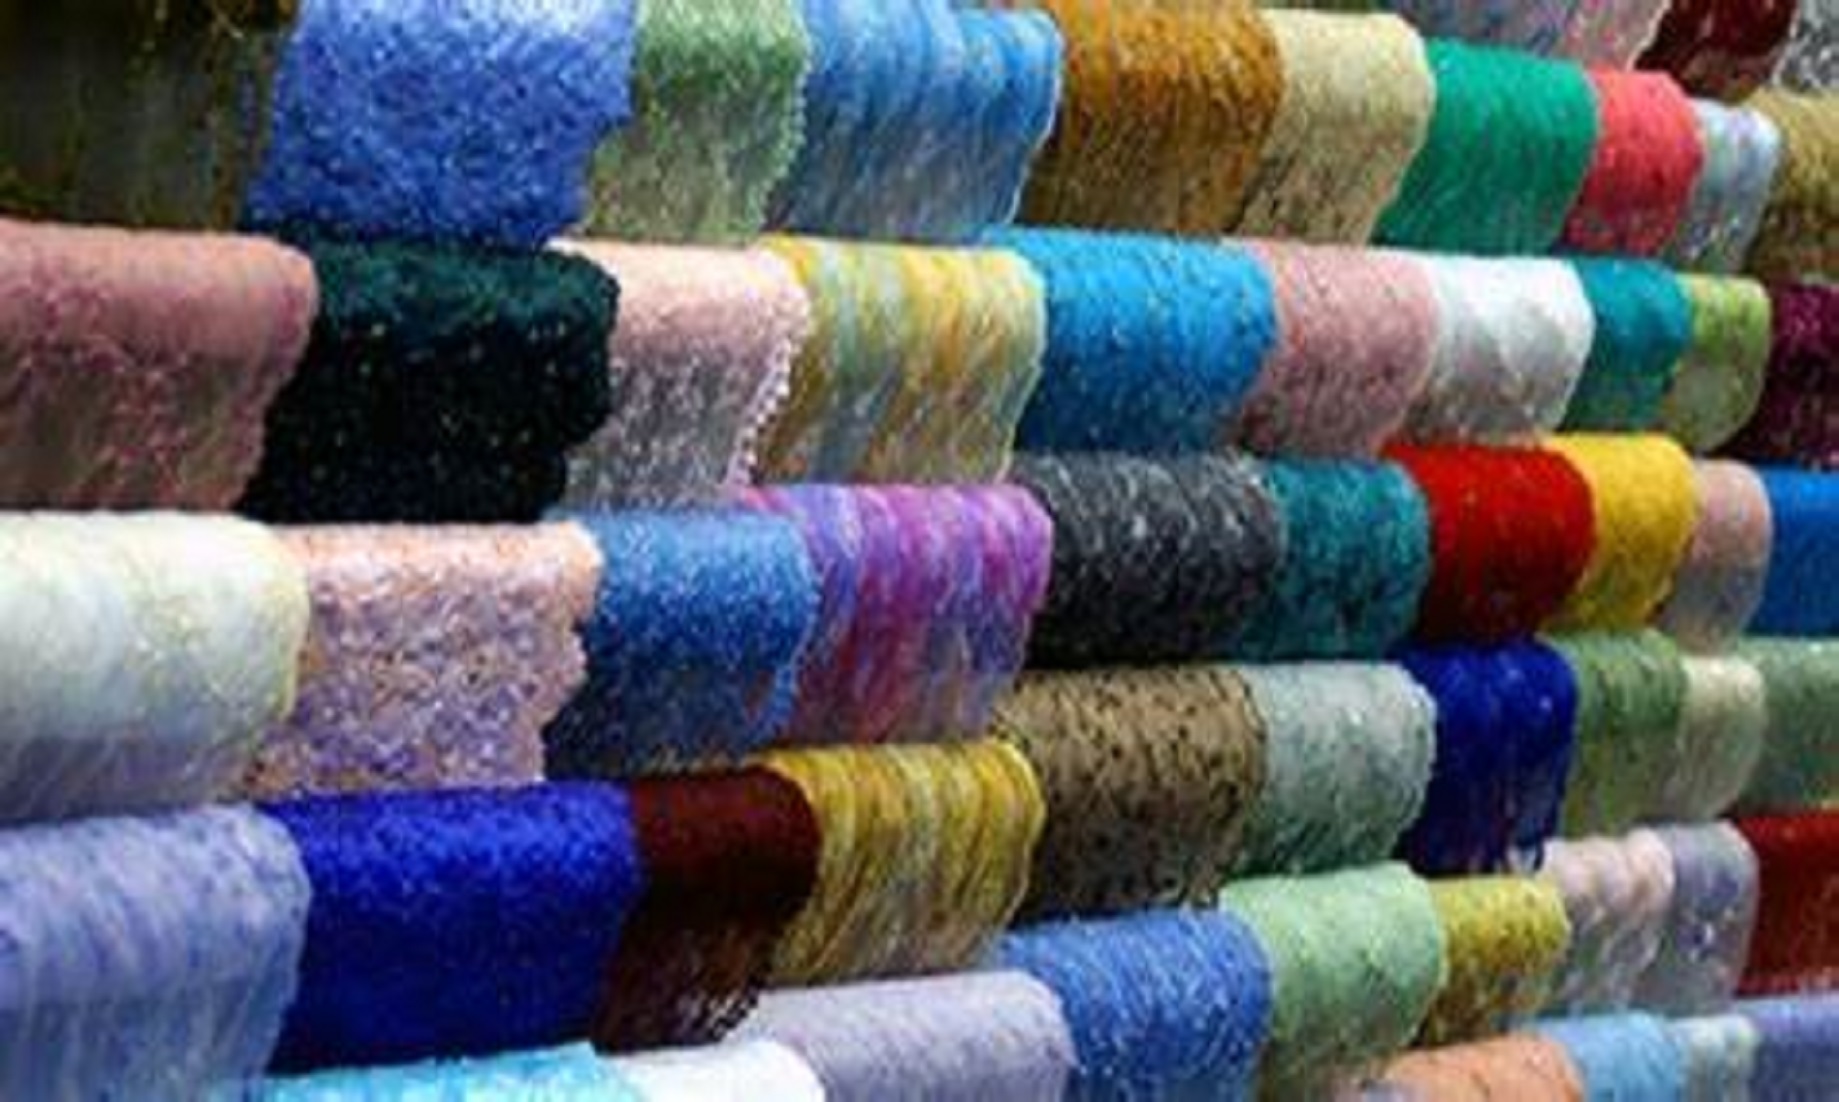 China, Pakistan Discuss Ways To Enhance B2B Matchmaking In Textile Industry Under CPEC